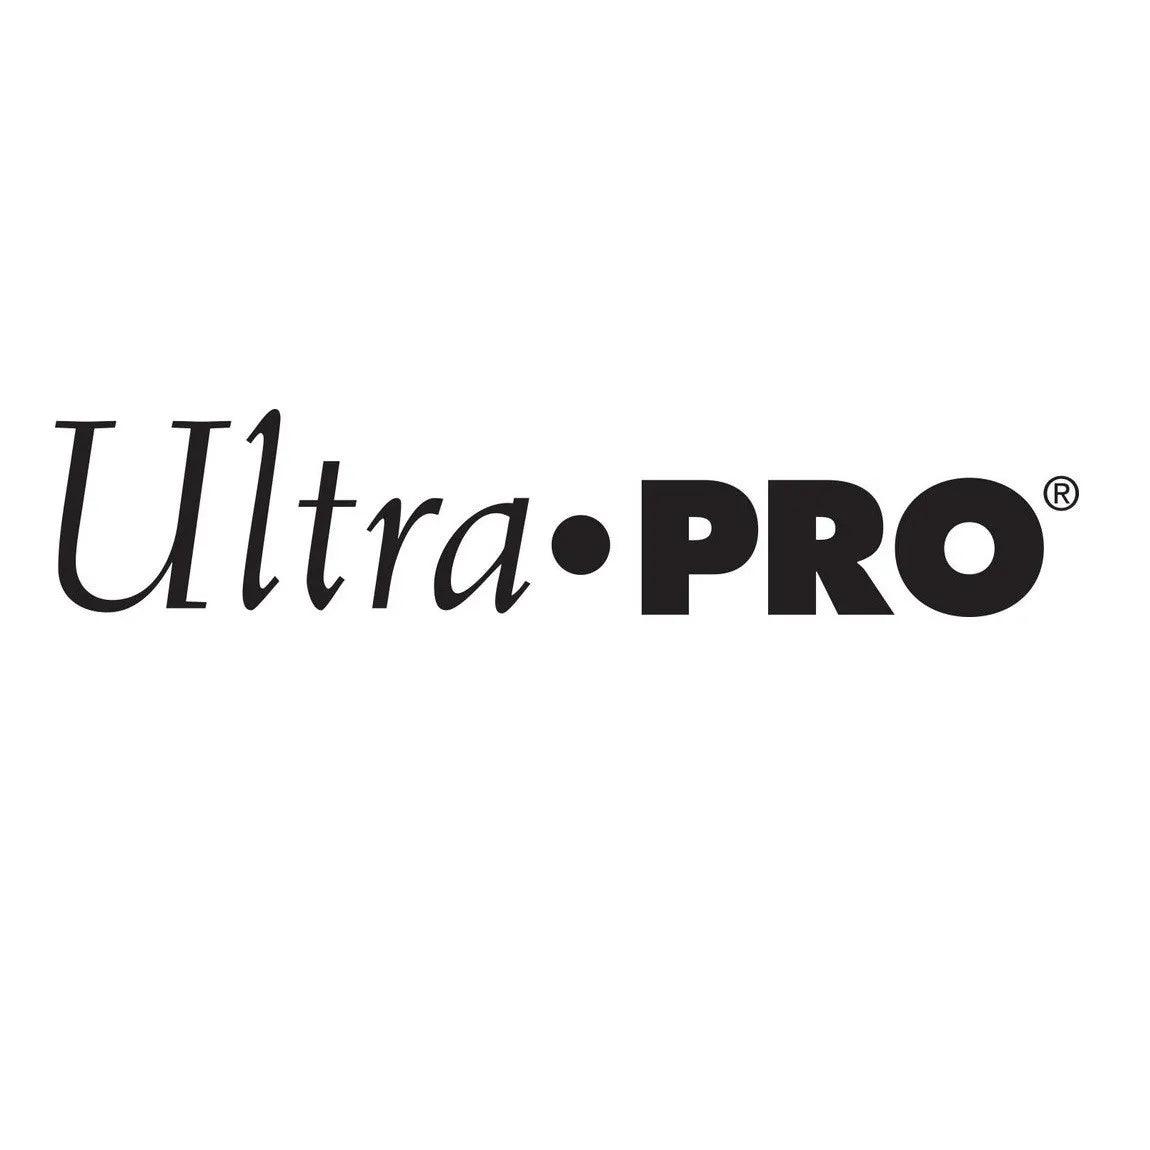 Ultra PRO - Card Sleeves (100ct) - For Thick Cards (130pt) - Hobby Champion Inc